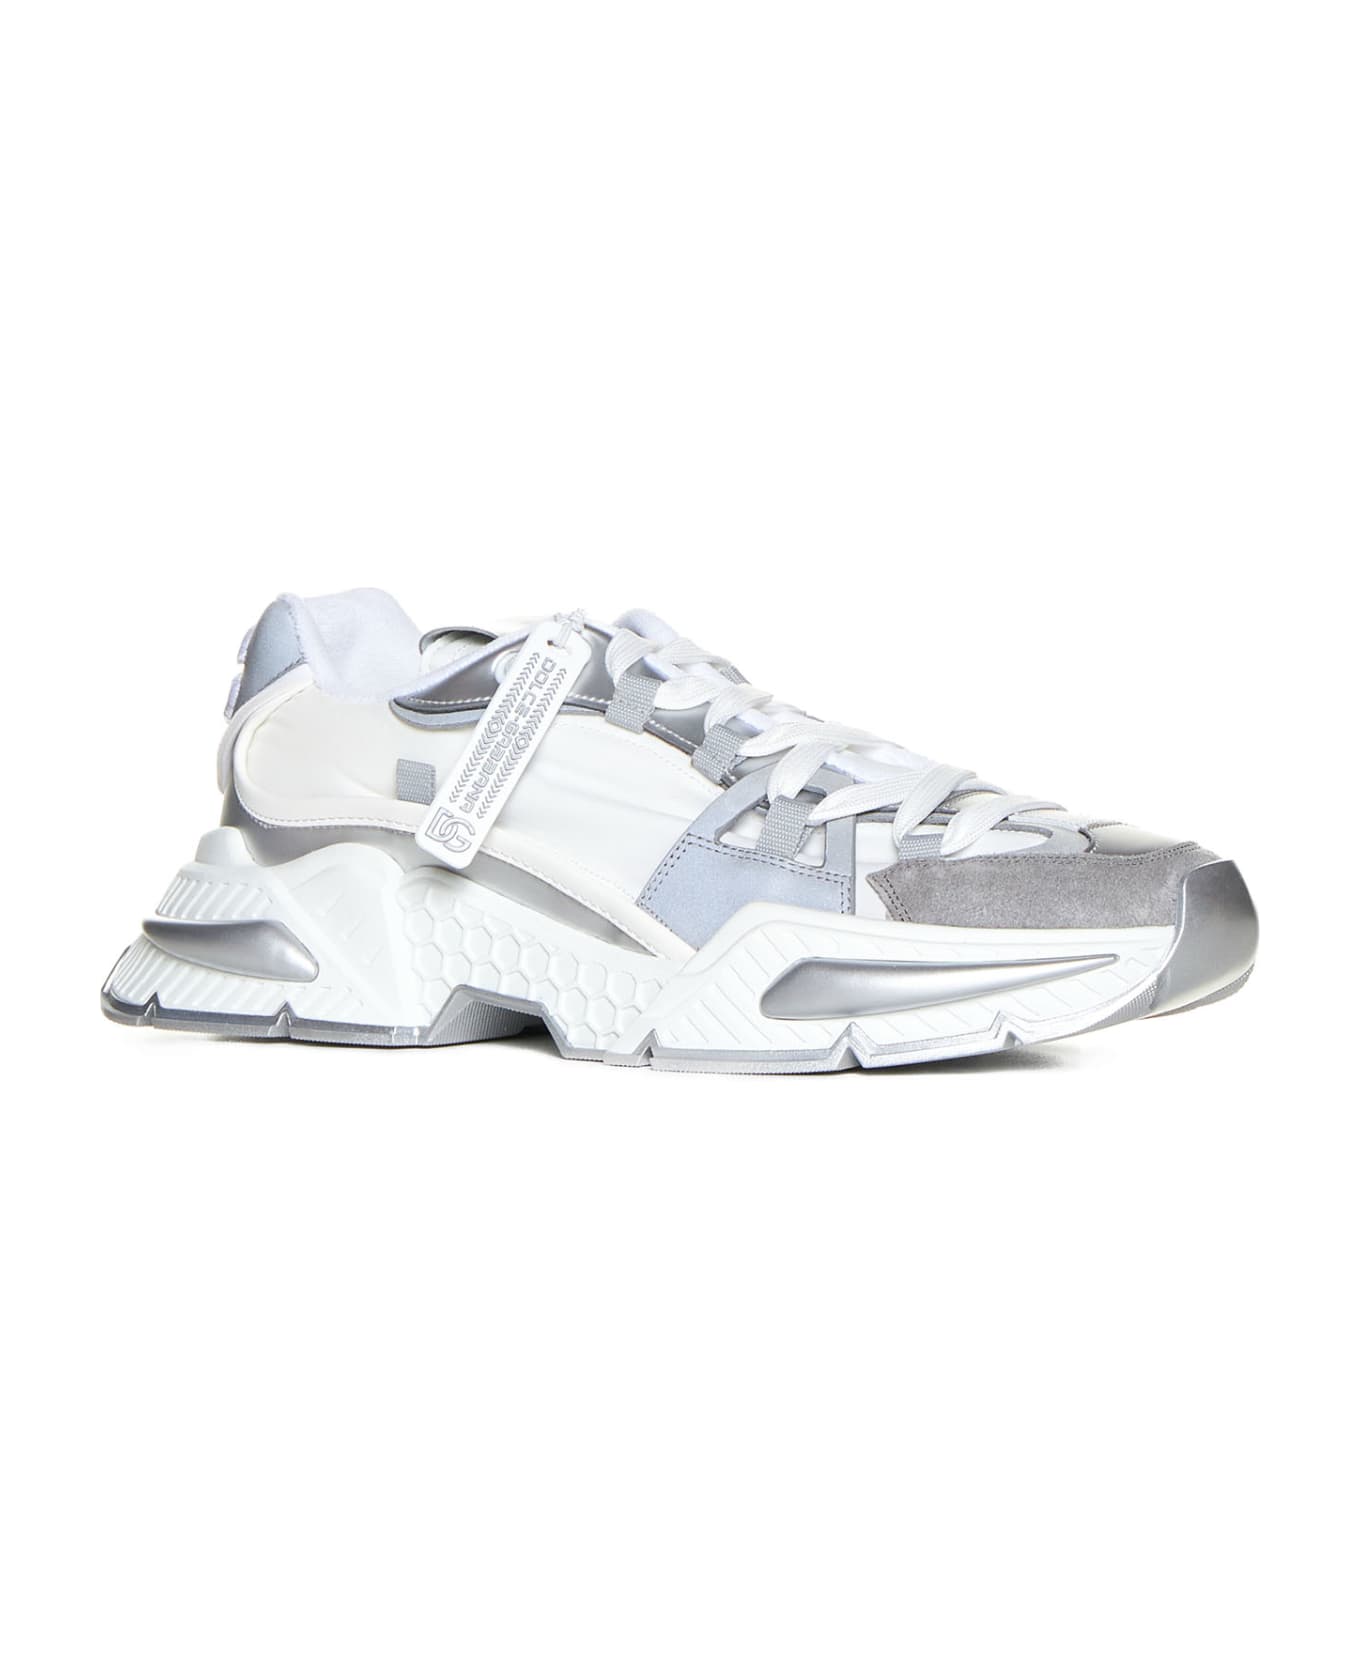 Dolce & Gabbana Airmaster Sneakers - Argento/bianco スニーカー